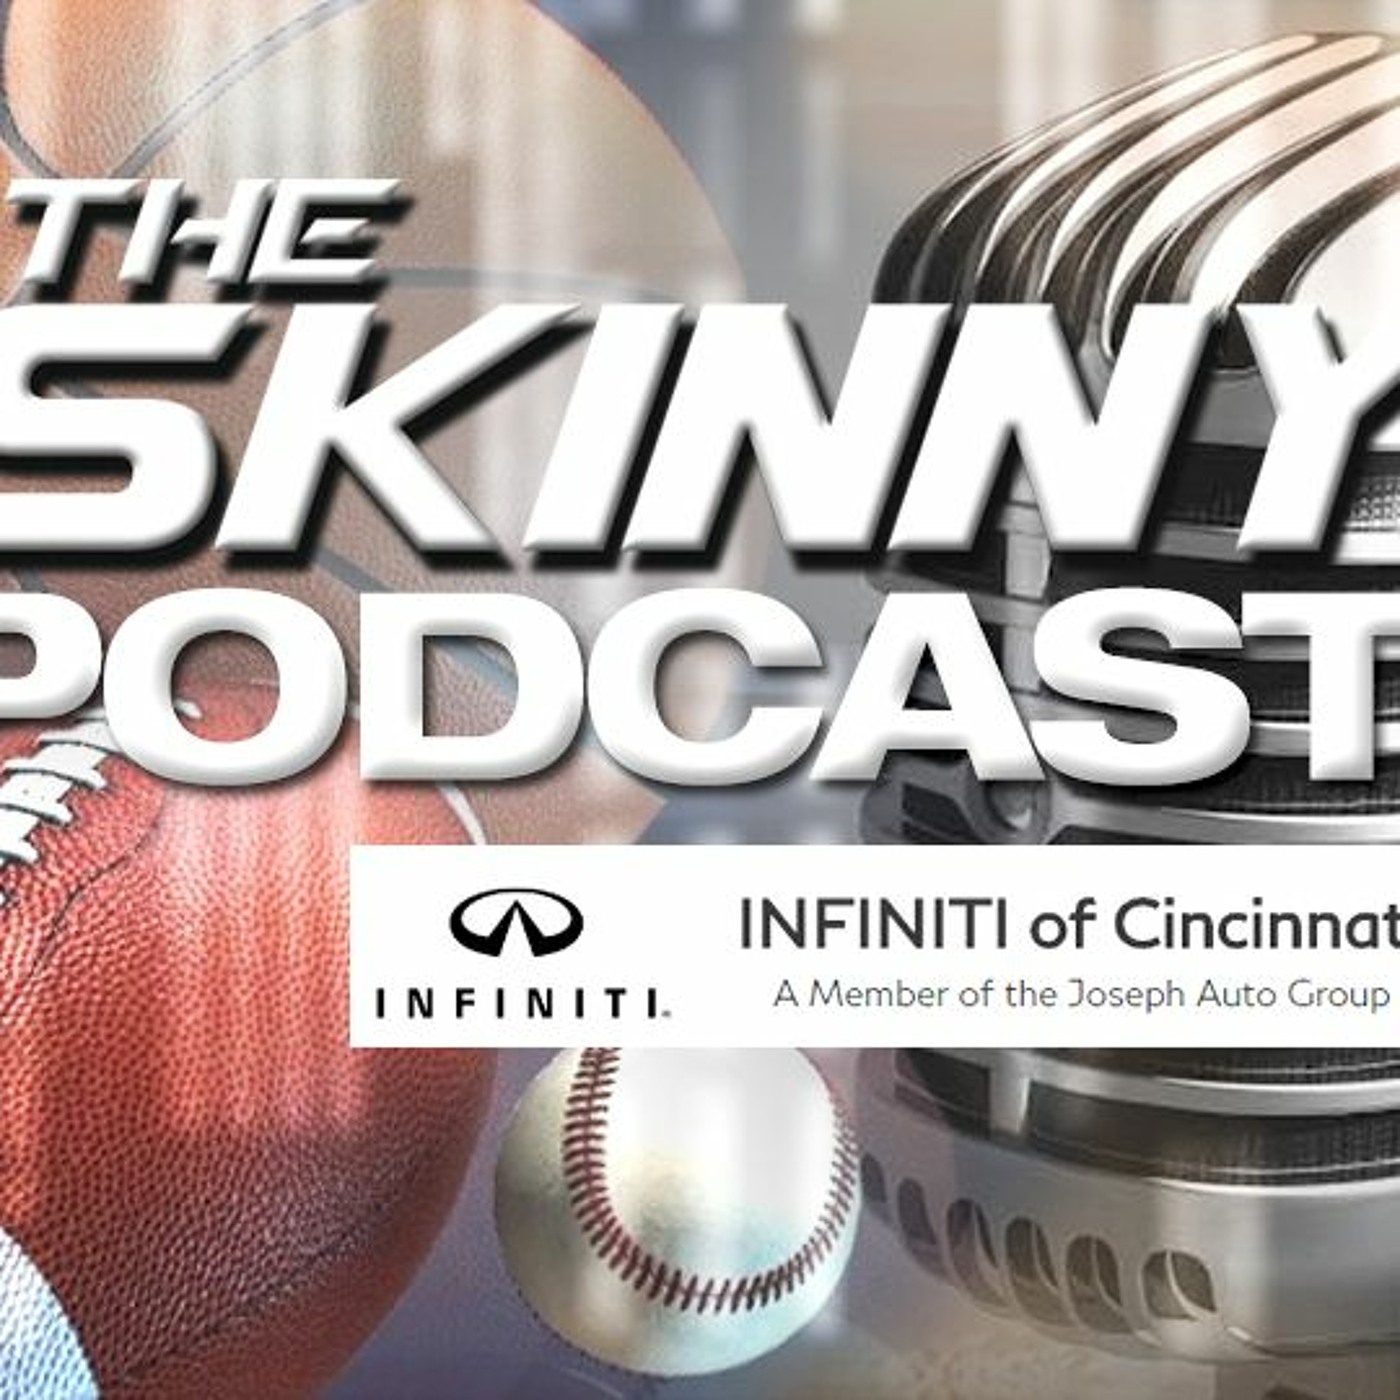 The Skinny Podcast: Talking sports with Rick Broering (11/14/18)